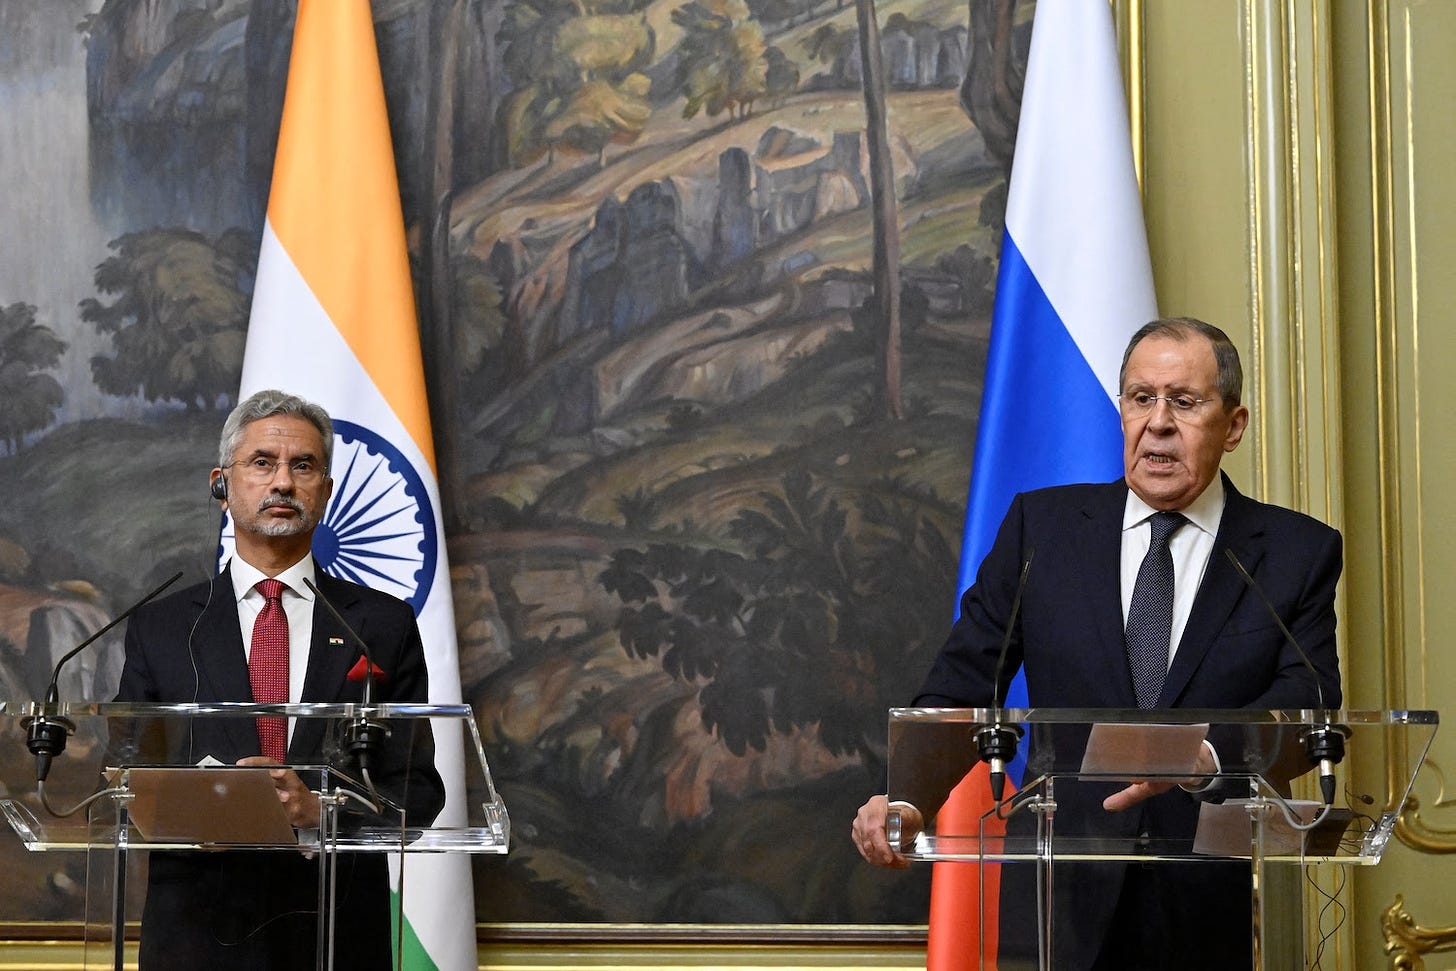 Russian Foreign Minister Sergey Lavrov Indian External Affairs Minister S. Jaishankar hold a joint press conference  in Moscow on Dec. 27.